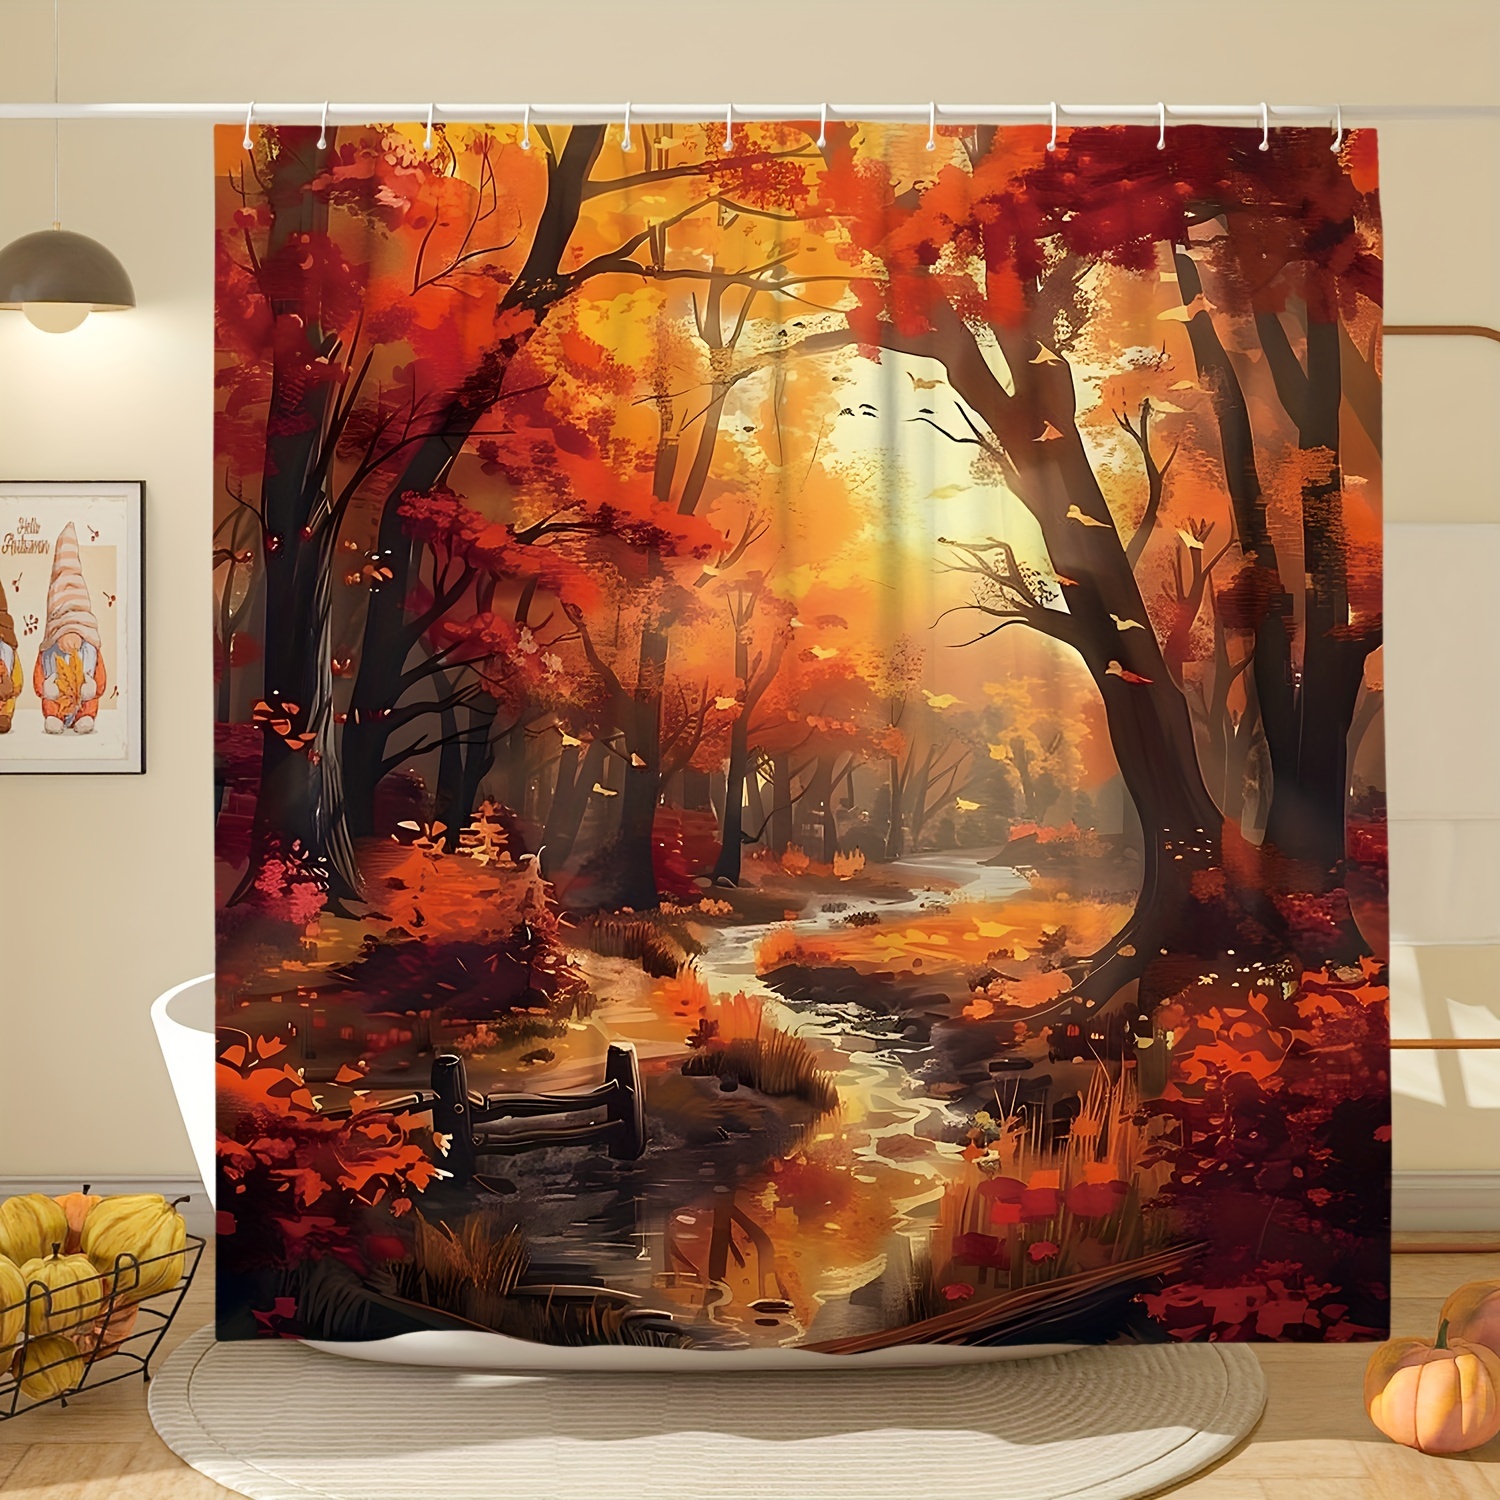 

Water-resistant Fall Forest Shower Curtain With Maple Trees And River Design, Polyester Woven Fabric, Machine Washable, Includes 12 Hooks, Unlined, Autumn-themed Bathroom Decor, 71x71 Inches